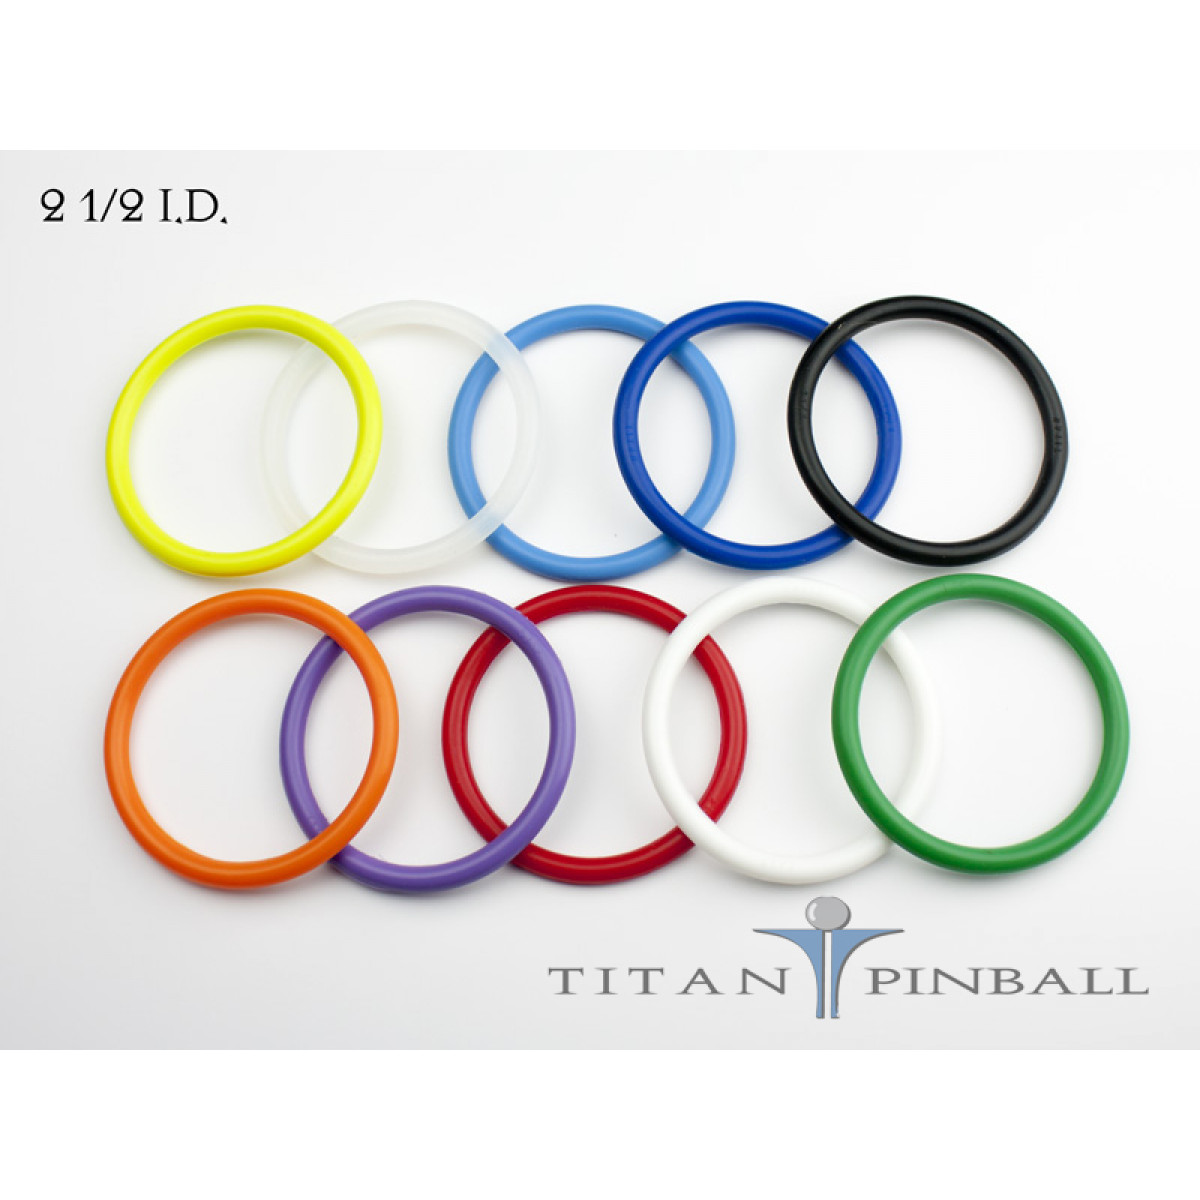 125-Piece Translucent Silicone Pinball Rubber Ring Set 